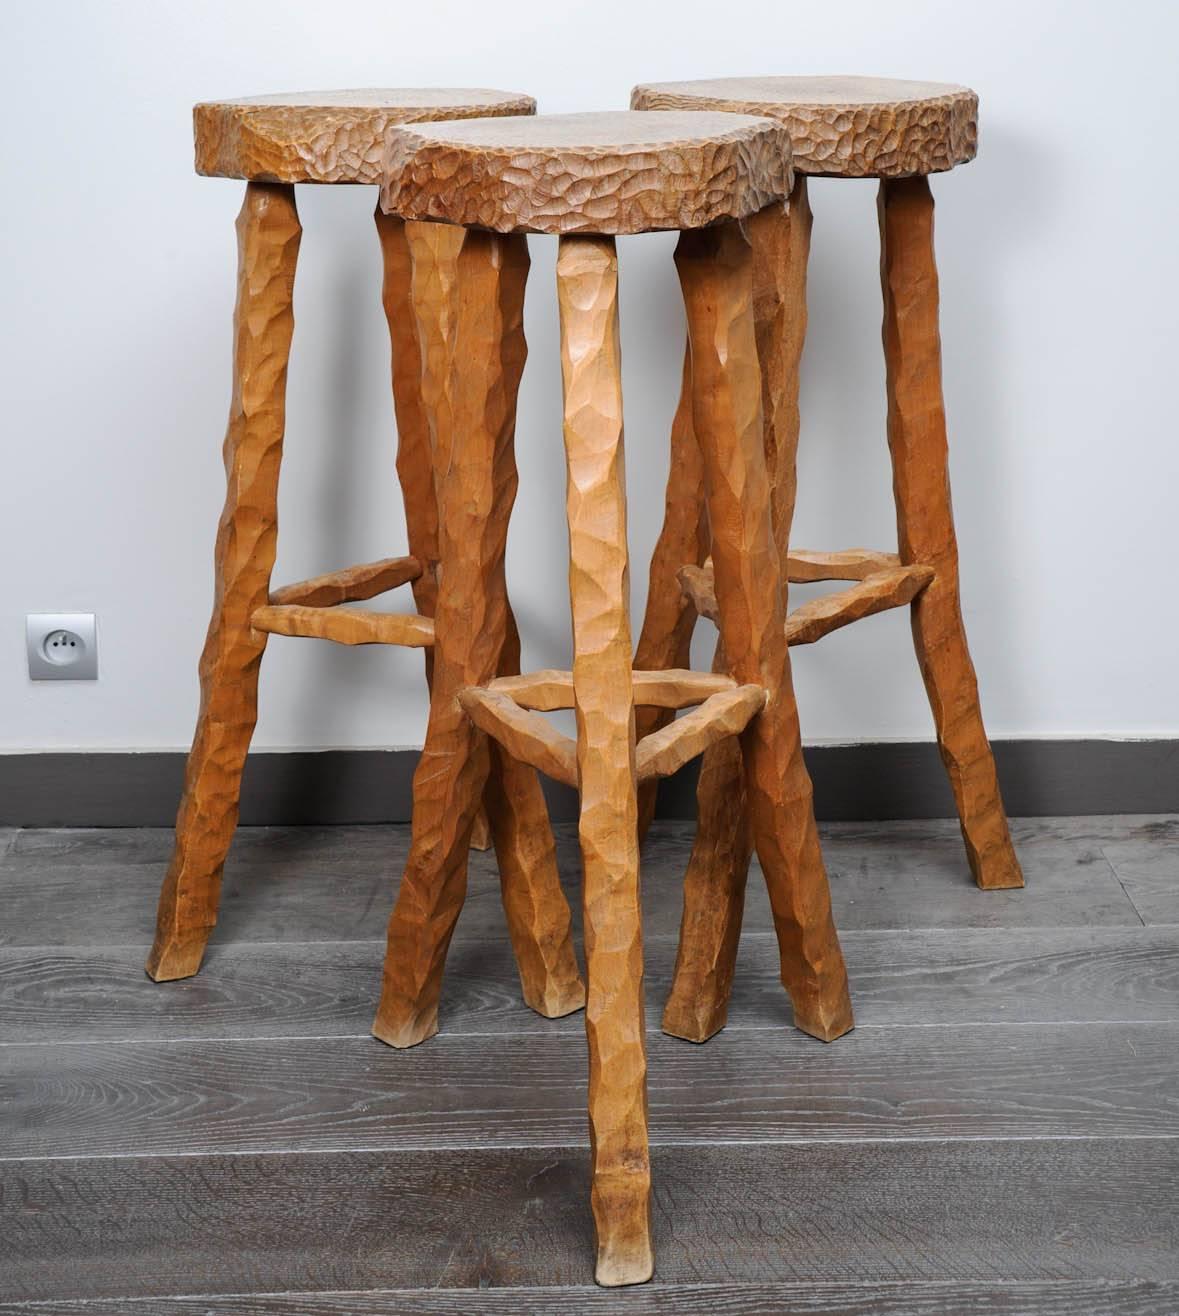 Set of three bar stools in solid oak with a hand scraped finish to the top.
In style of Atelier Marolles by Jean Touret, circa 1950.